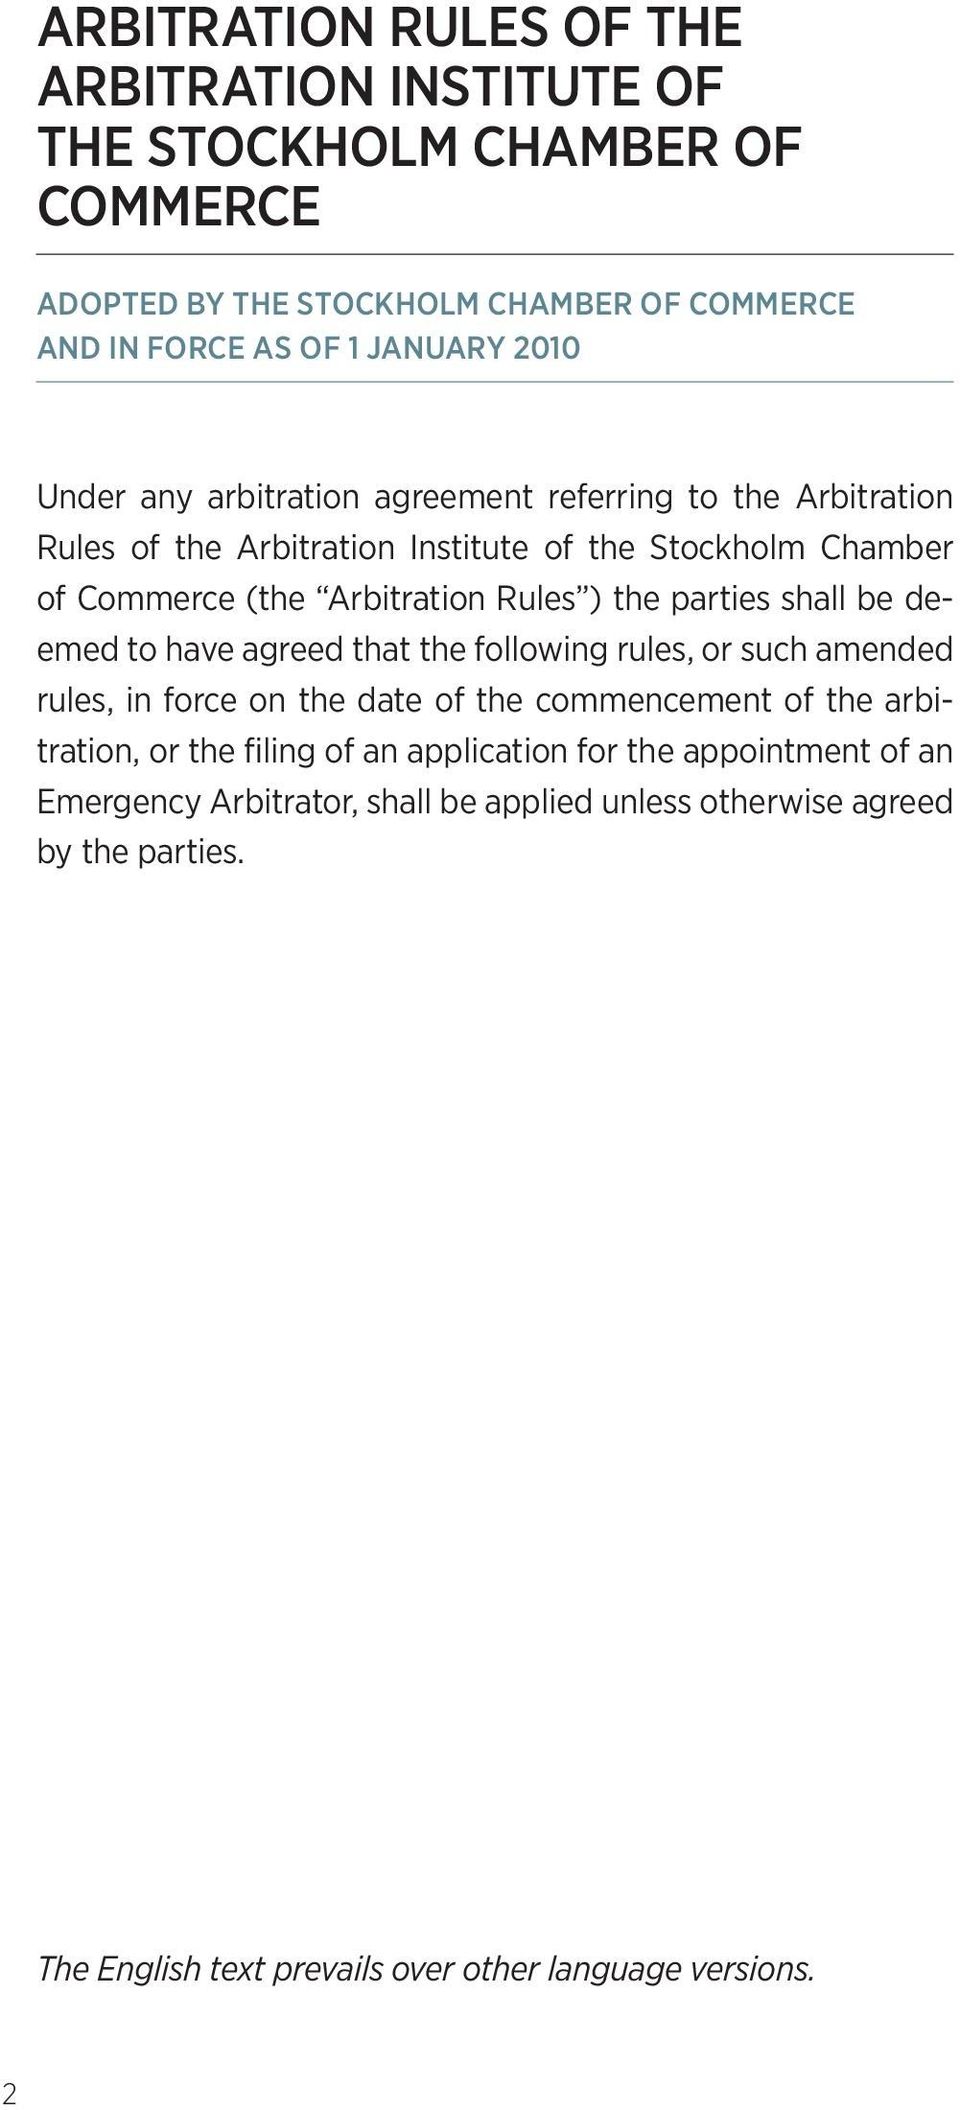 parties shall be deemed to have agreed that the following rules, or such amended rules, in force on the date of the commencement of the arbitration, or the filing of